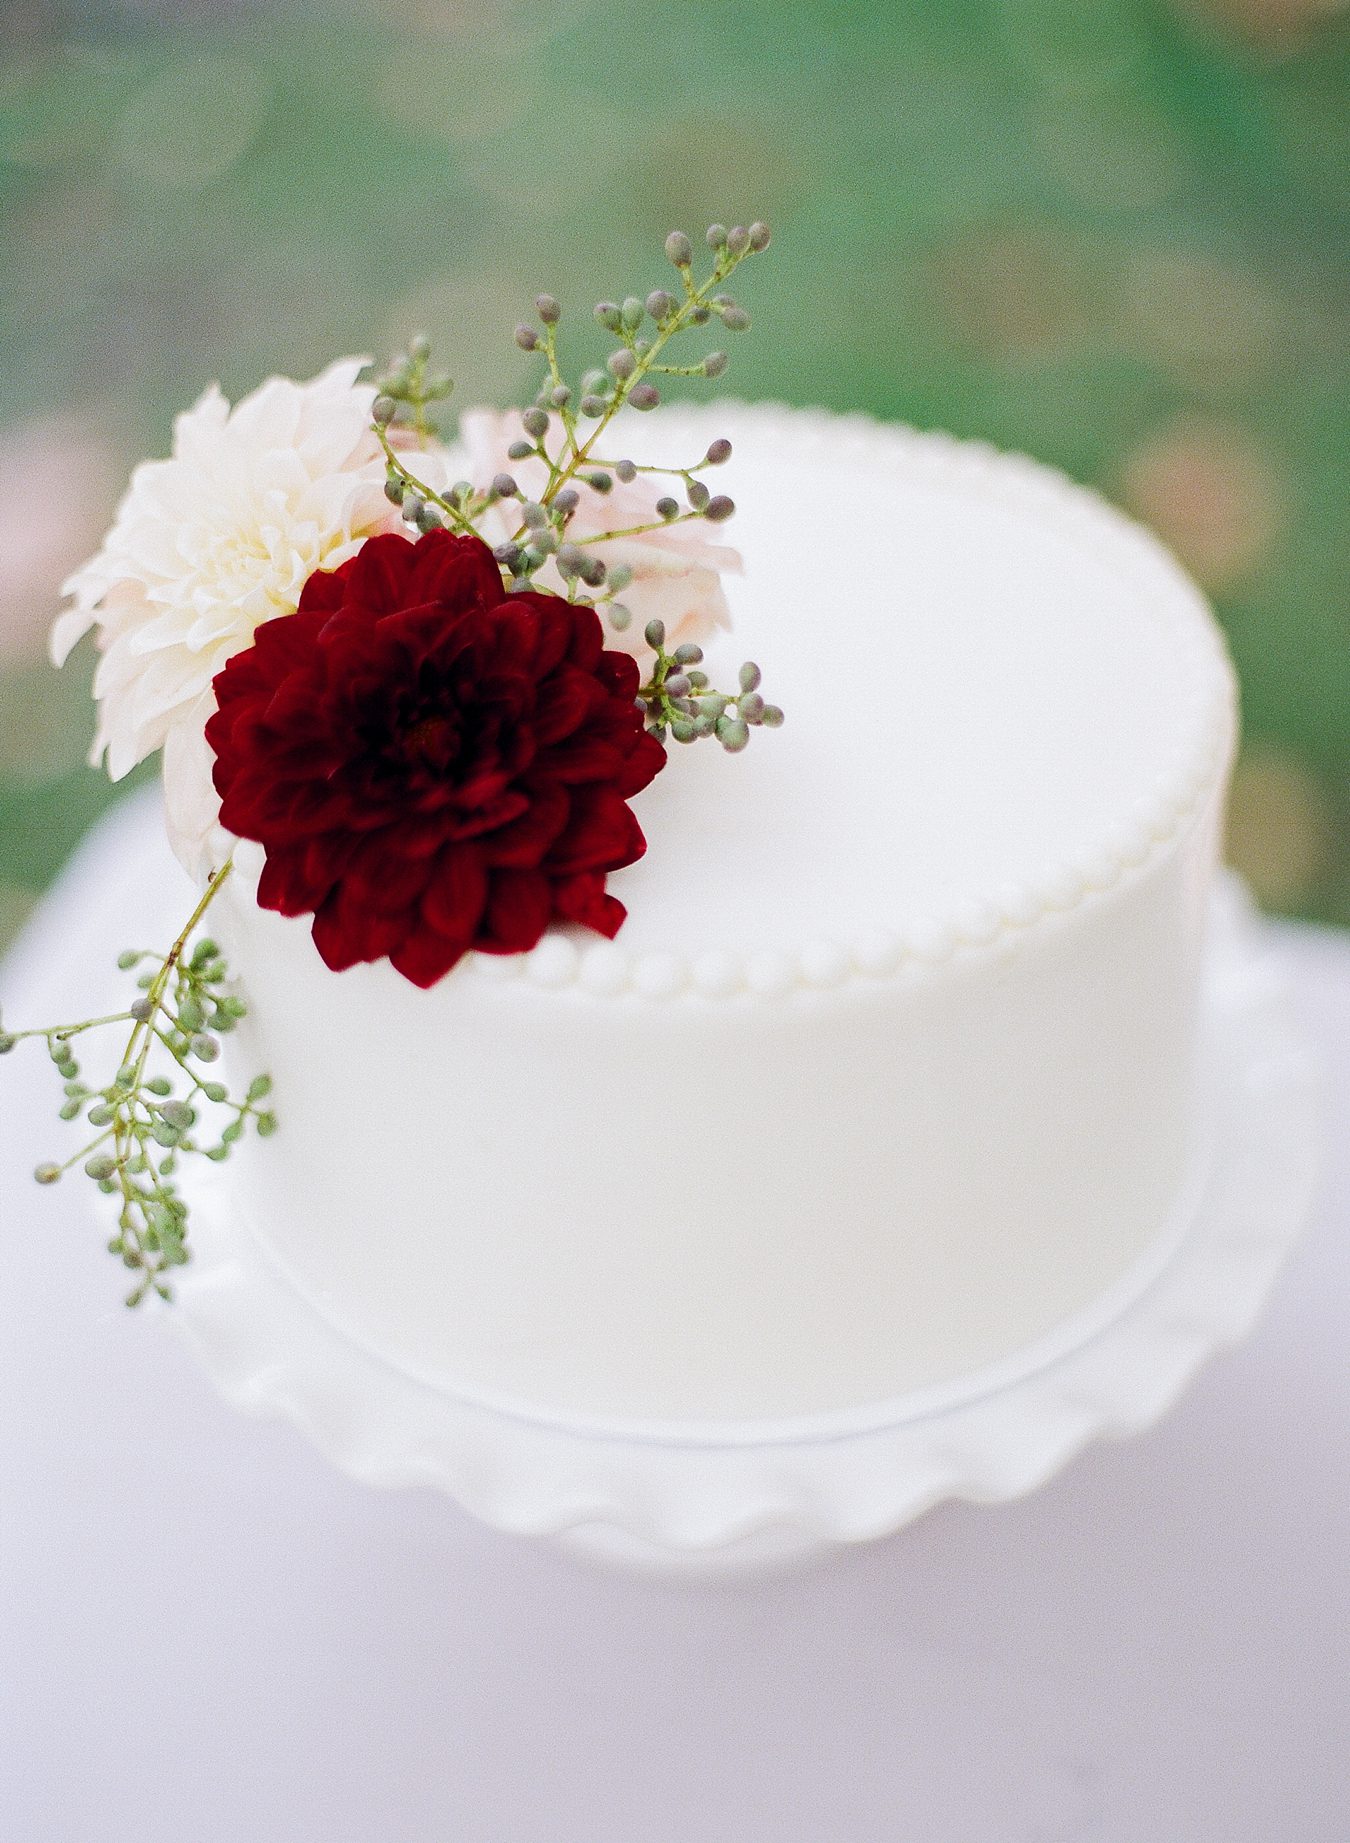 Aunt B's Cakes | Cory Weber Photography | Sincerely, Ginger Event Design & Production | BLOOM Floral Design